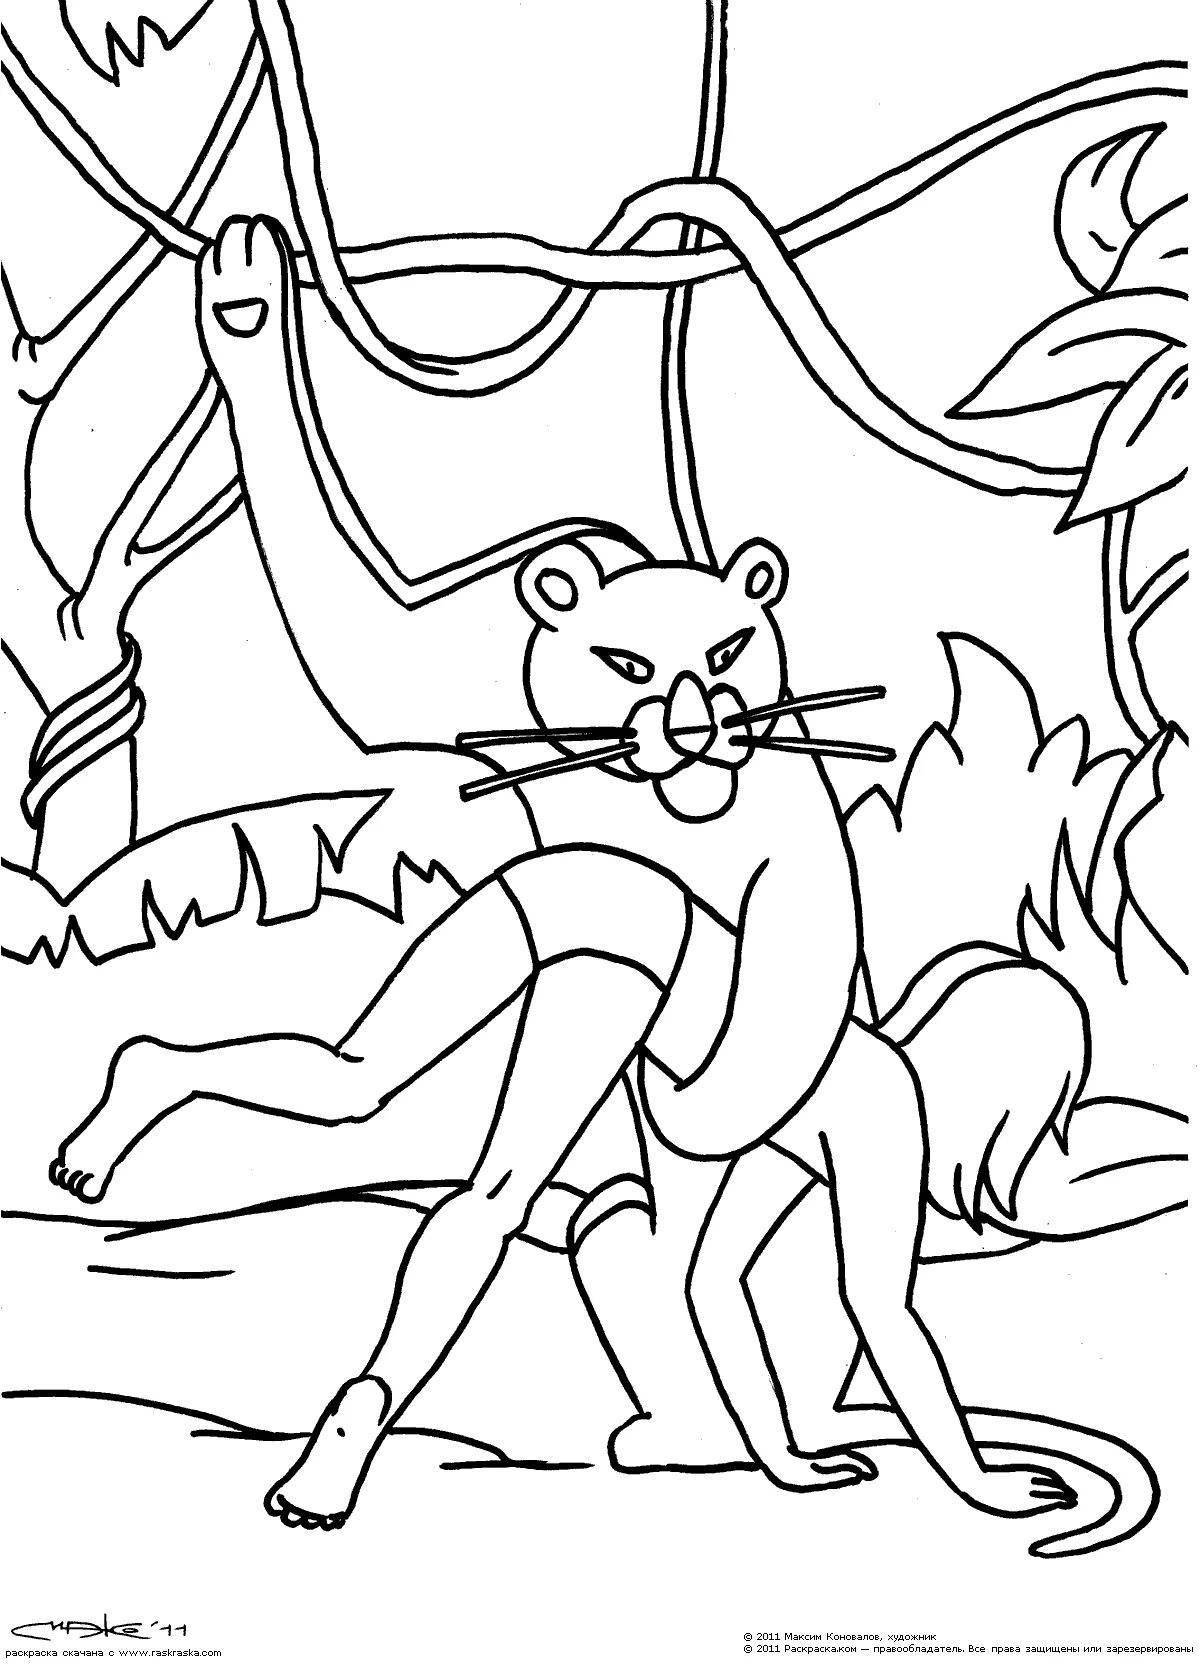 Exciting coloring of Mowgli and Bagheera